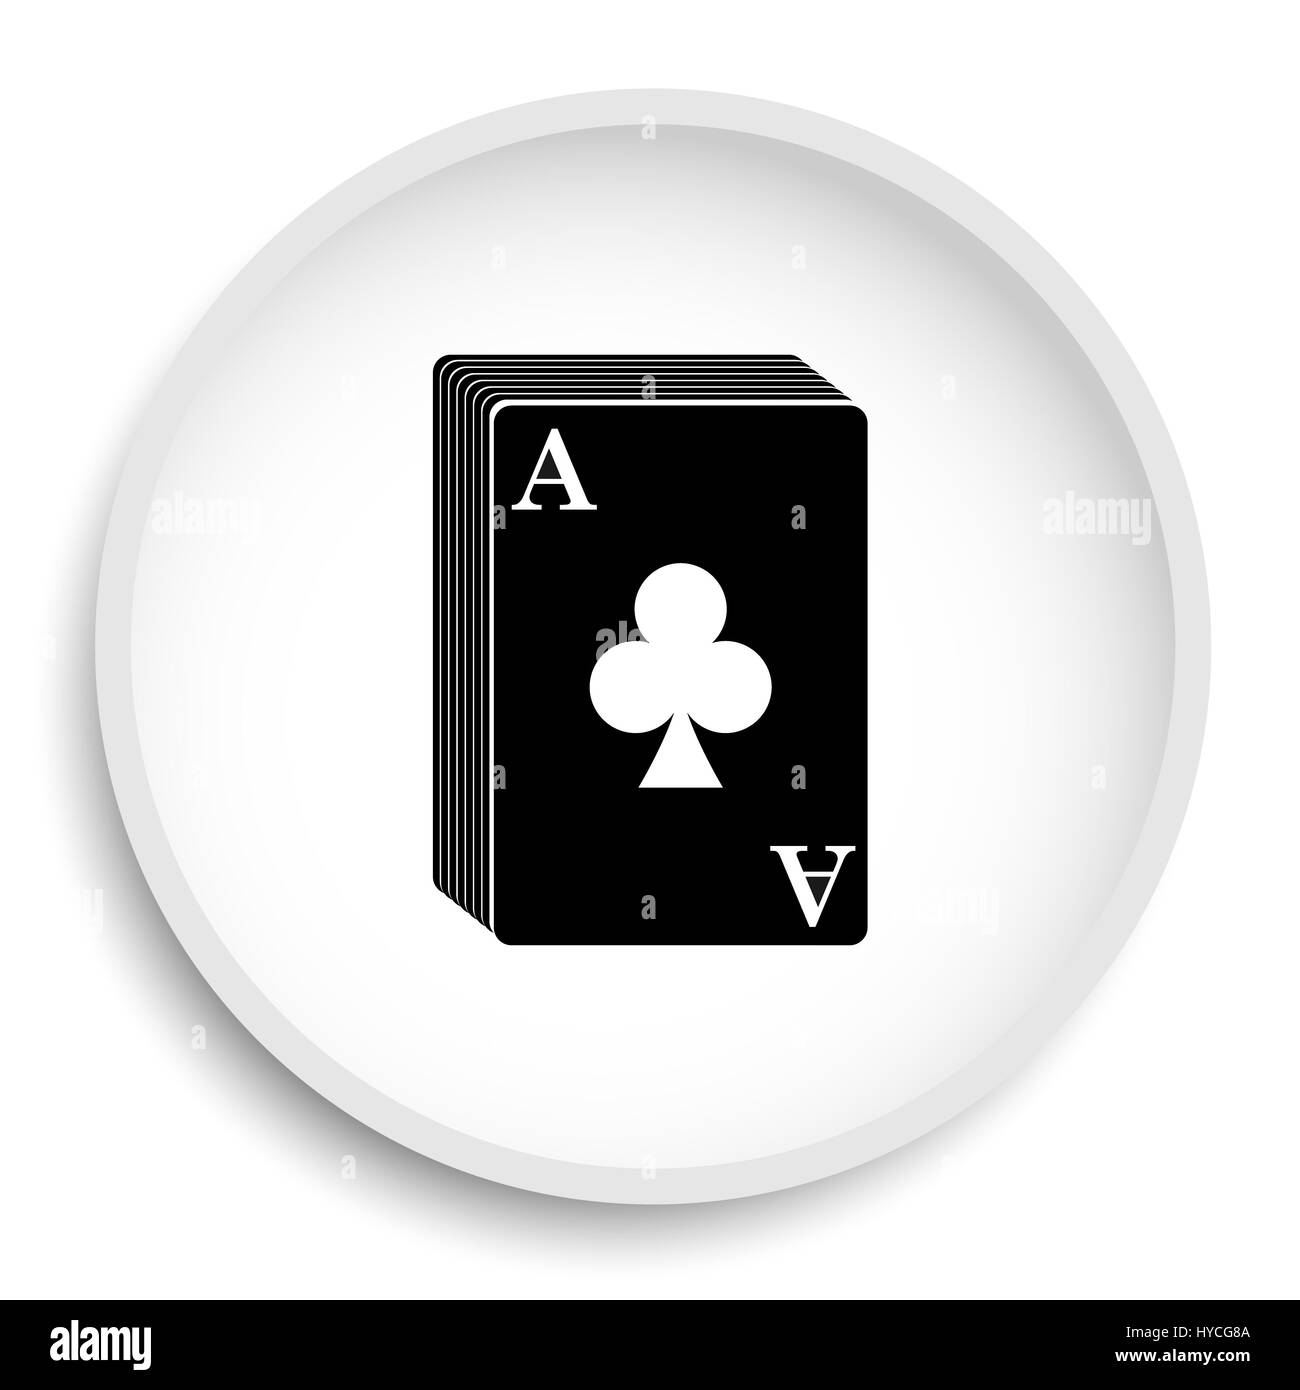 Deck of cards icon. Deck of cards website button on white background. Stock Photo